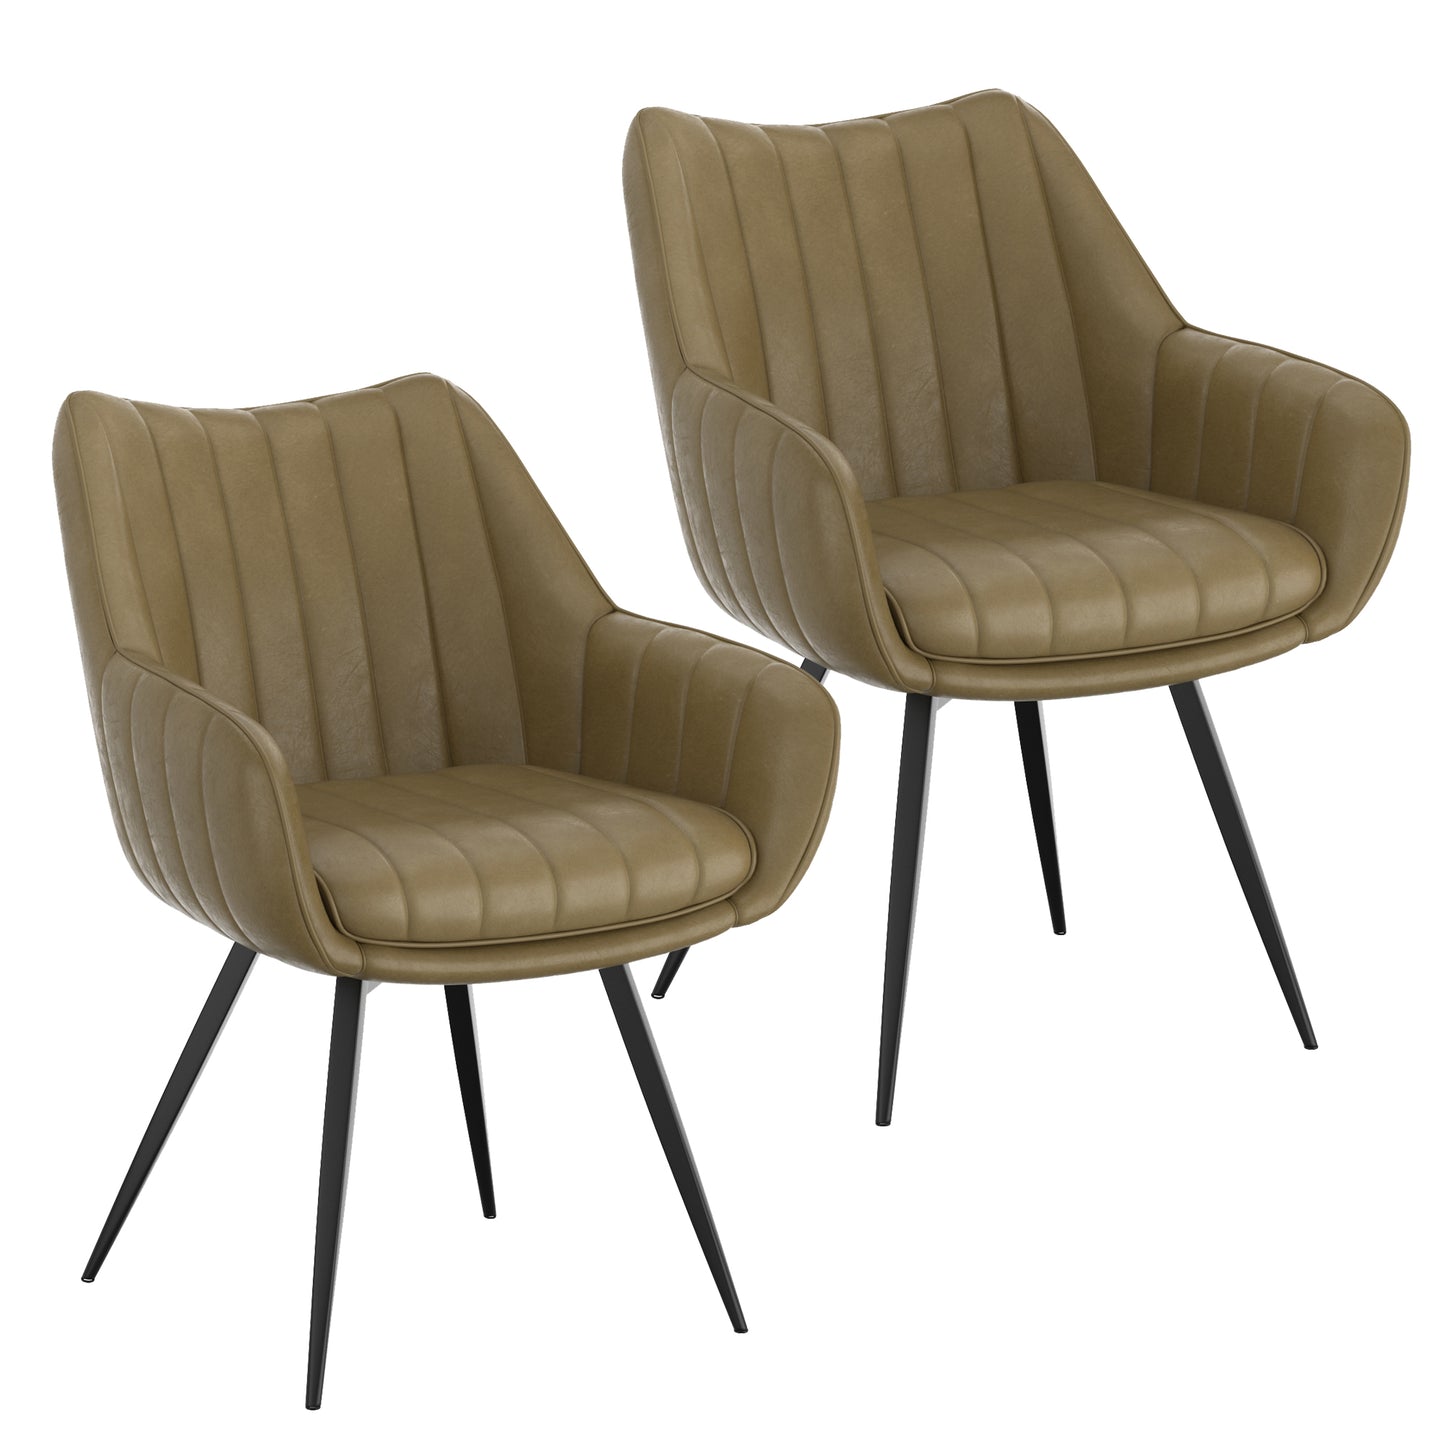 Talon Swivel Dining and Accent Chair, set of 2, in Moss and Black